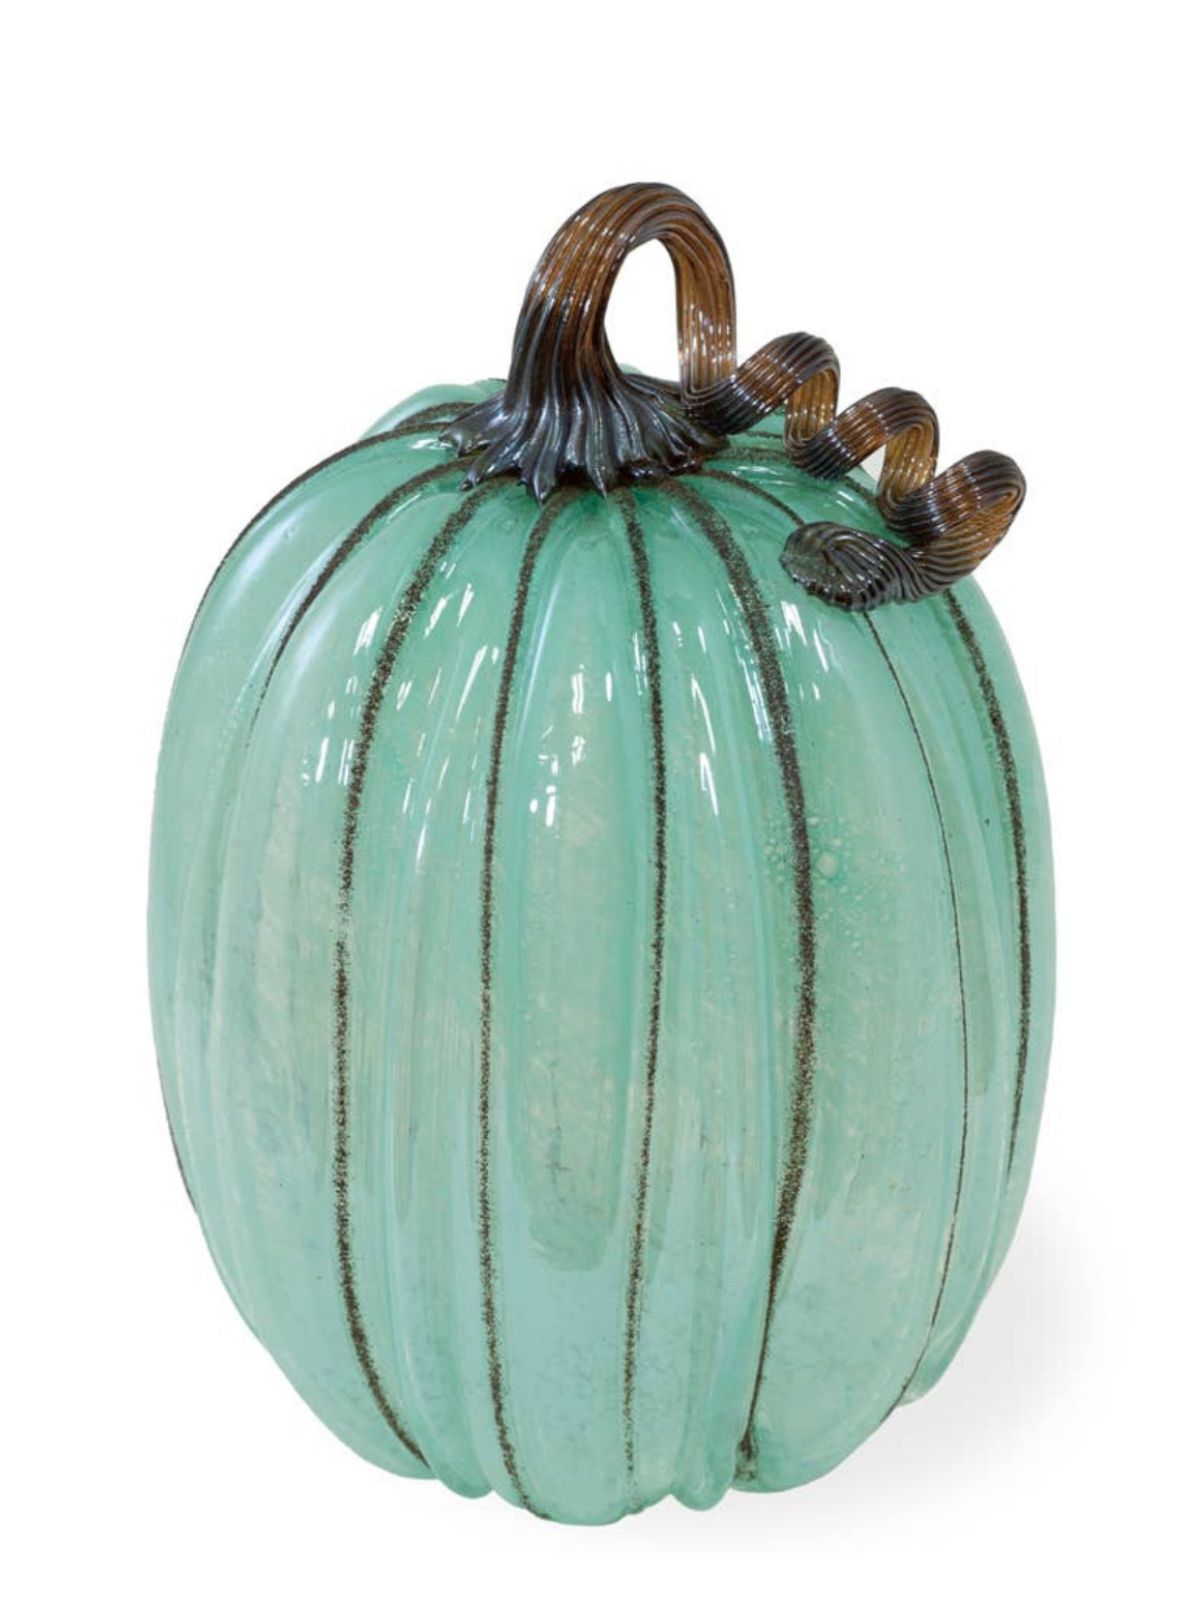 This Glass Harvest Pumpkin is perfect for bringing decorative seasonal beauty to your space. Hand-blown pumpkin has a twisted stem top in a coppery color and is crafted in a shade of light blue with copper accents.  